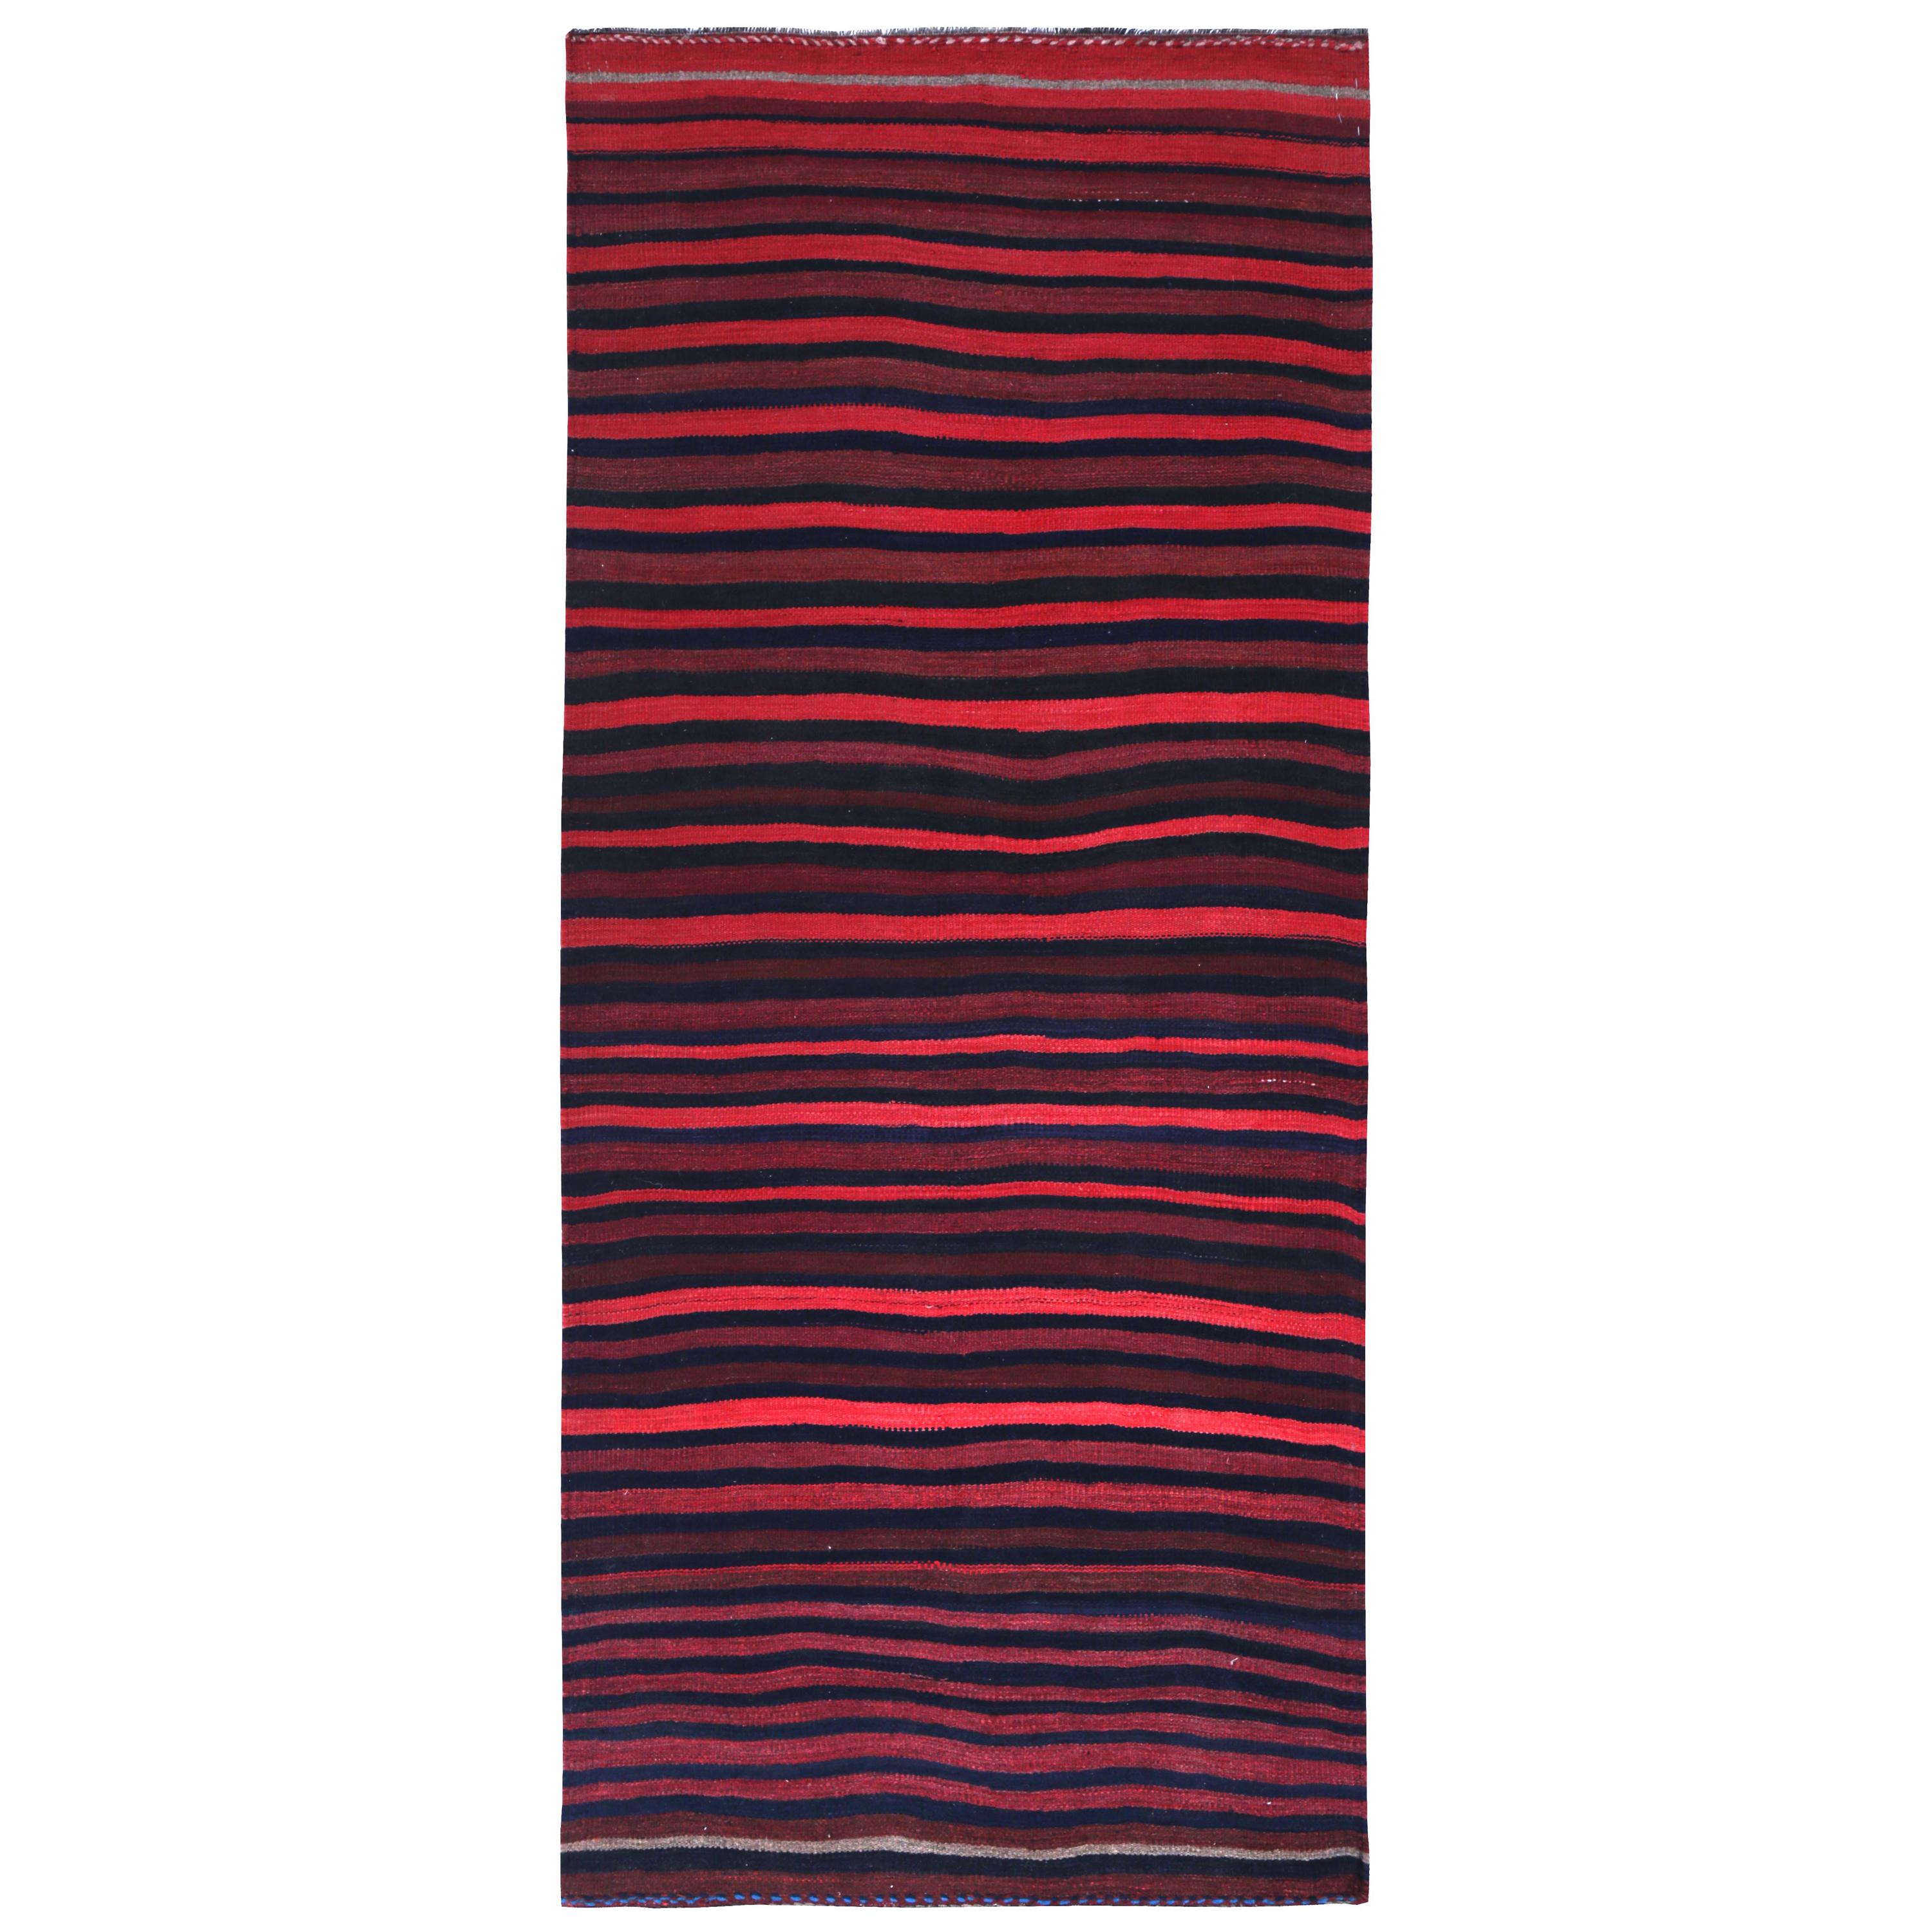 Turkish Kilim Runner Rug with Pink, Navy and Red Stripes